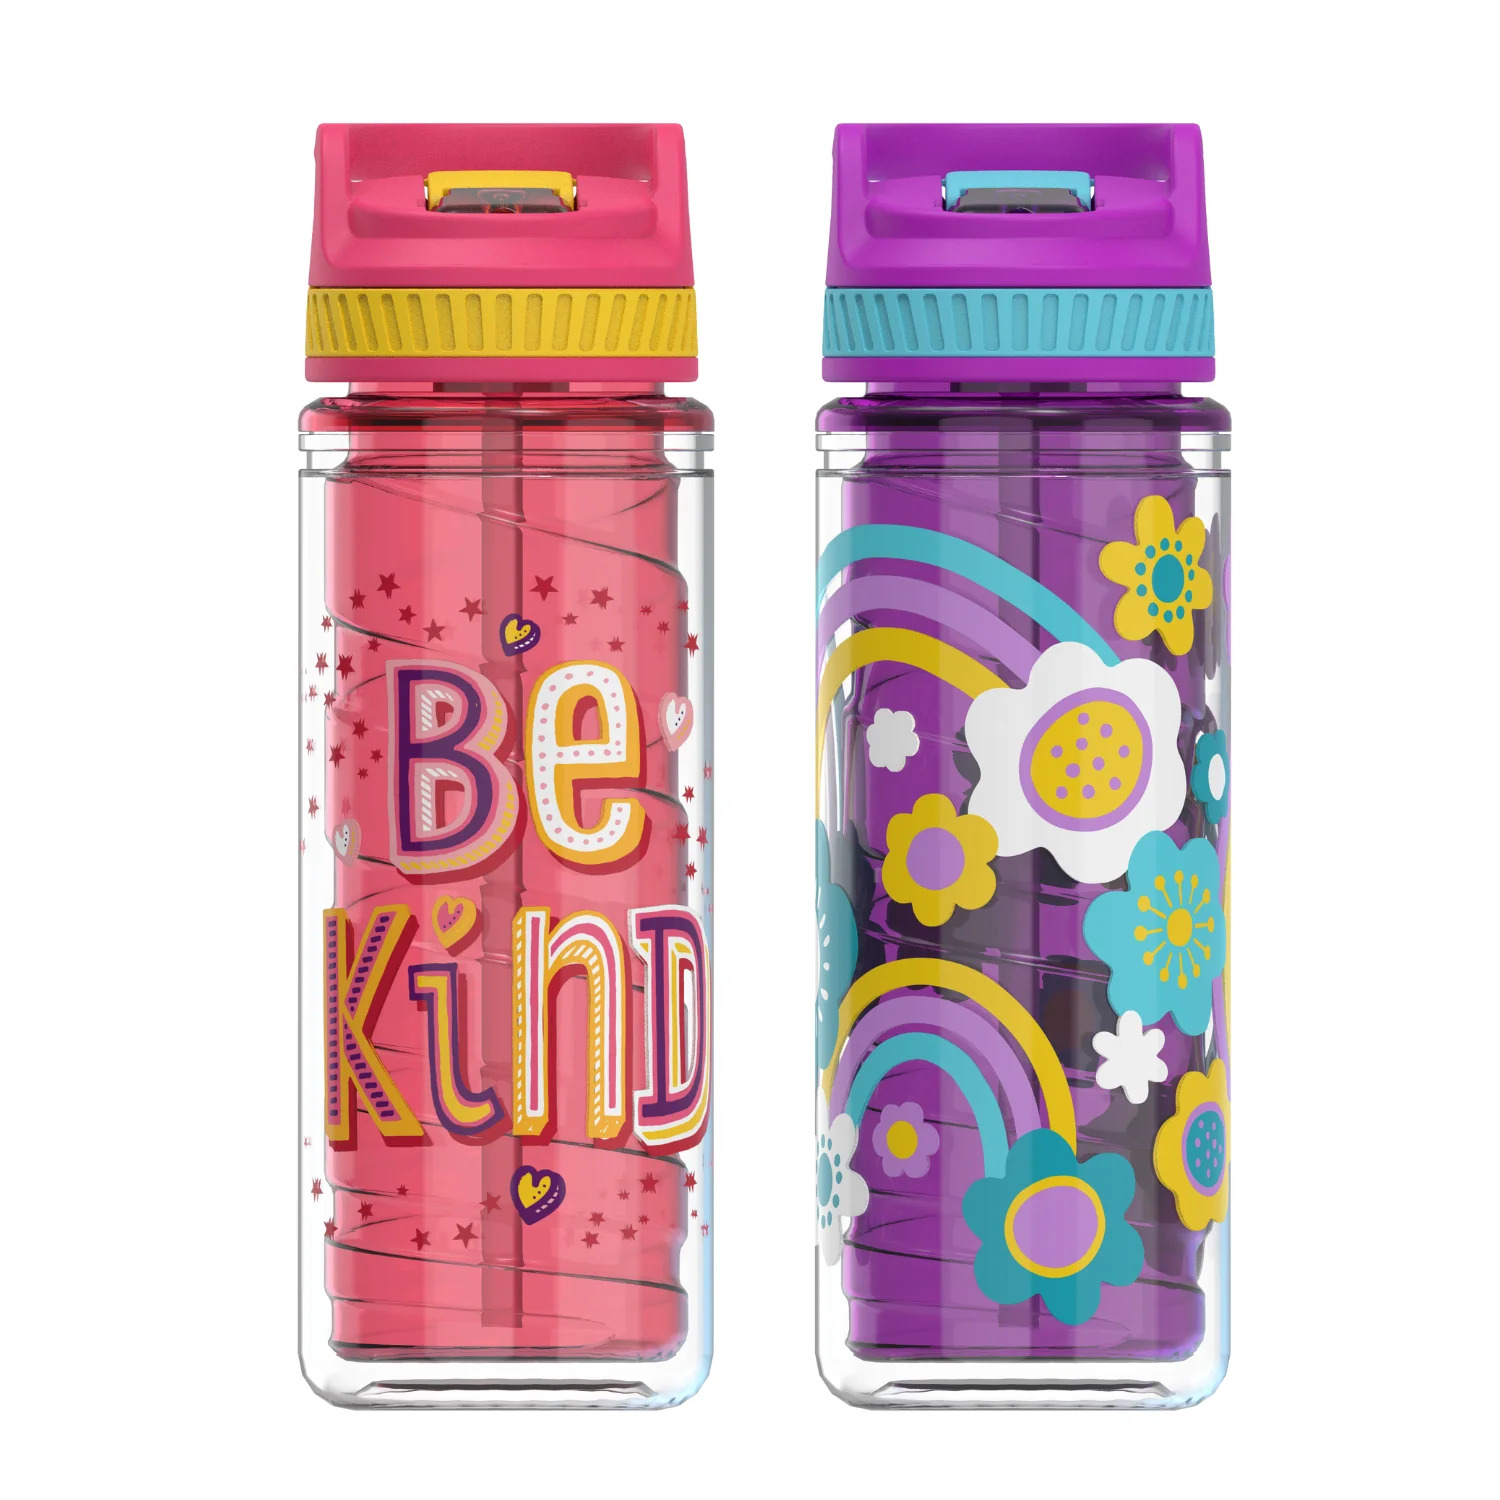 Cool Gear 2-Pack 16 oz Kid's Twist Water Bottle with Double Wall, Sipper Lid and Finger Loop Cap with Printed Design | Great for School, Sports, Outdoors, and More - Be Kind/ Flowers - image 1 of 3